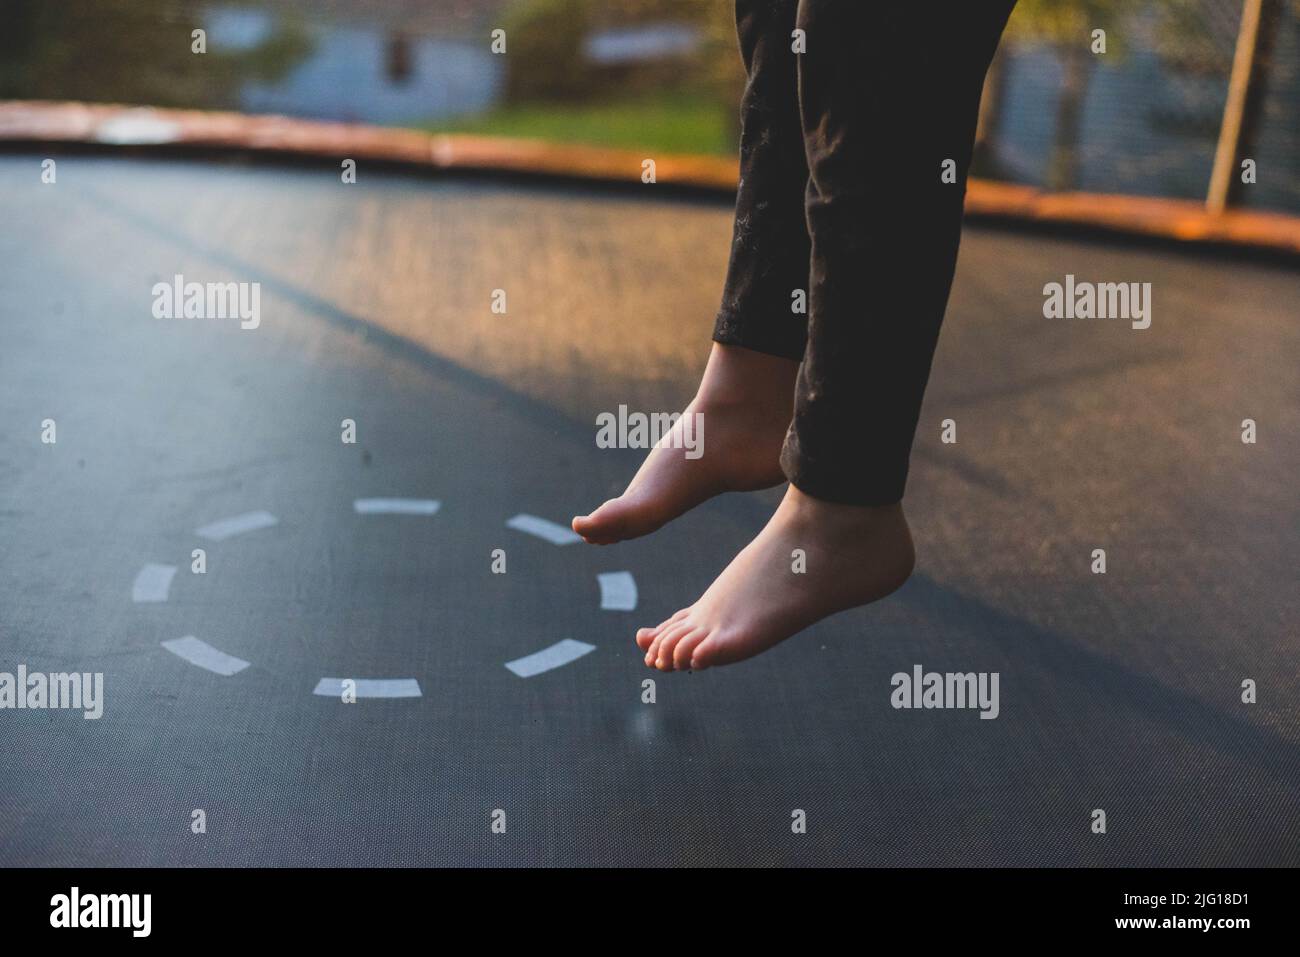 A seven year old girl child jumping on a trampoline. Stock Photo